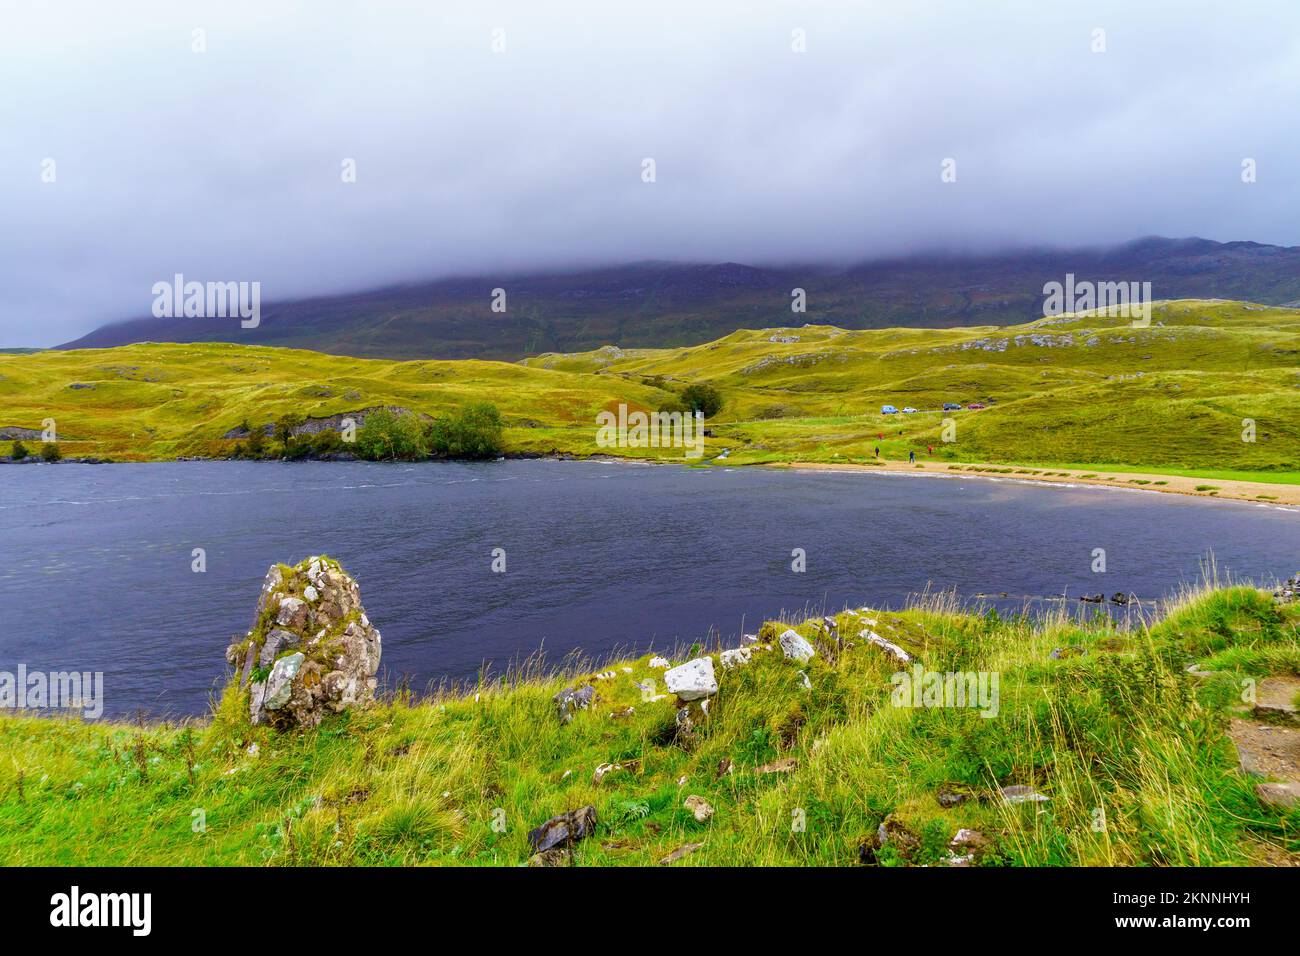 View of Loch Assynt landscape, in the Highlands, Scotland, UK Stock Photo